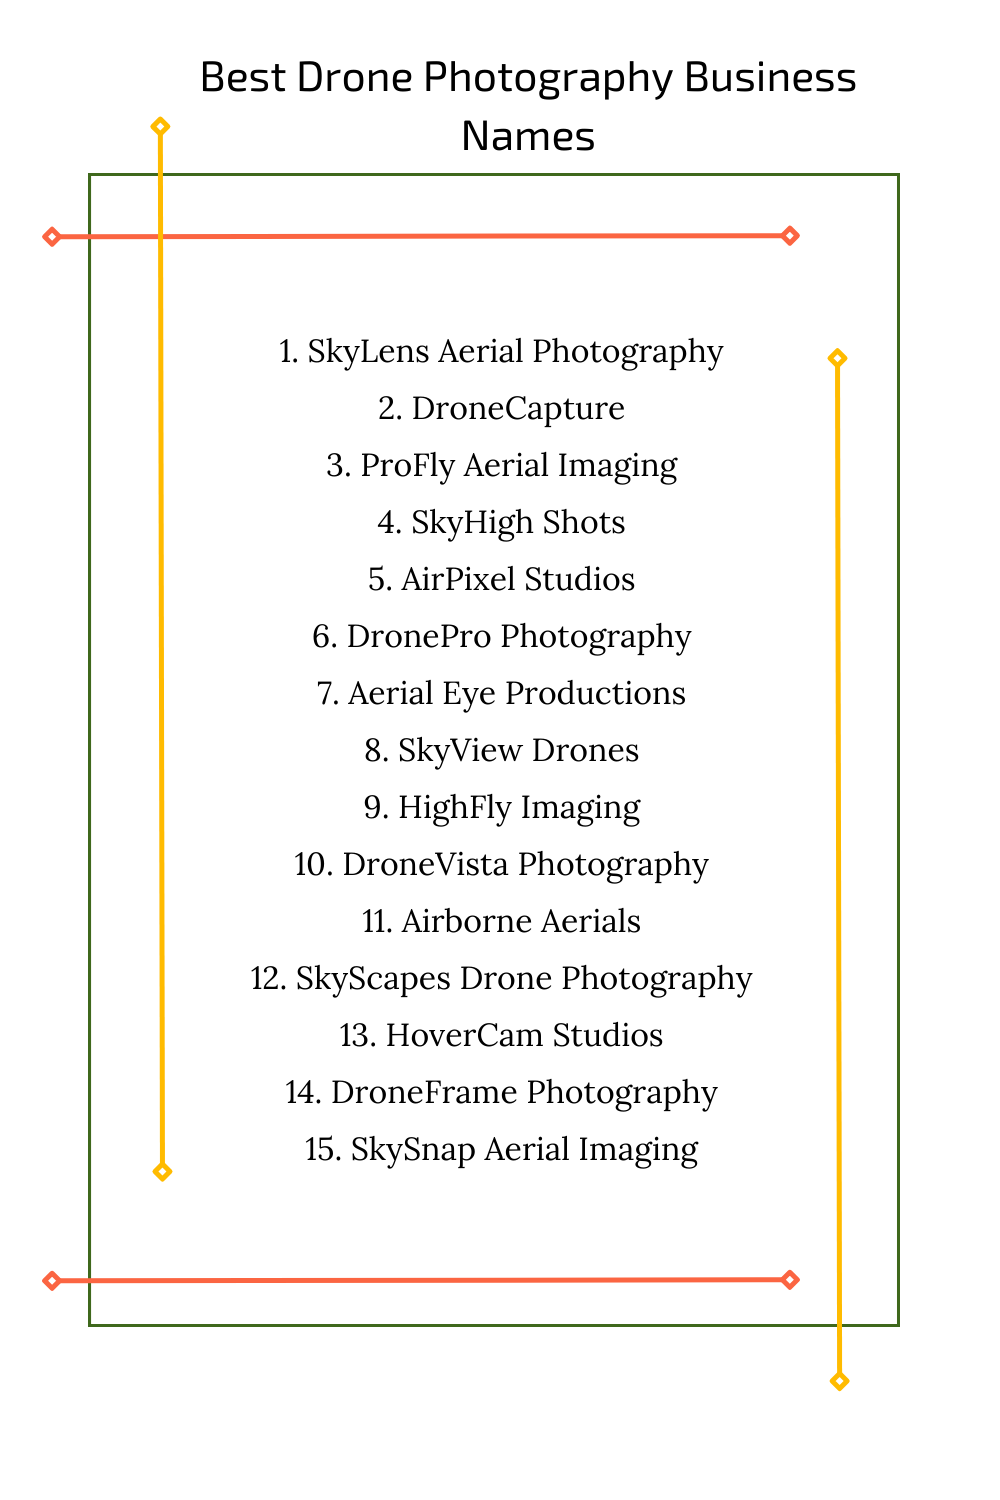 Best Drone Photography Business Names